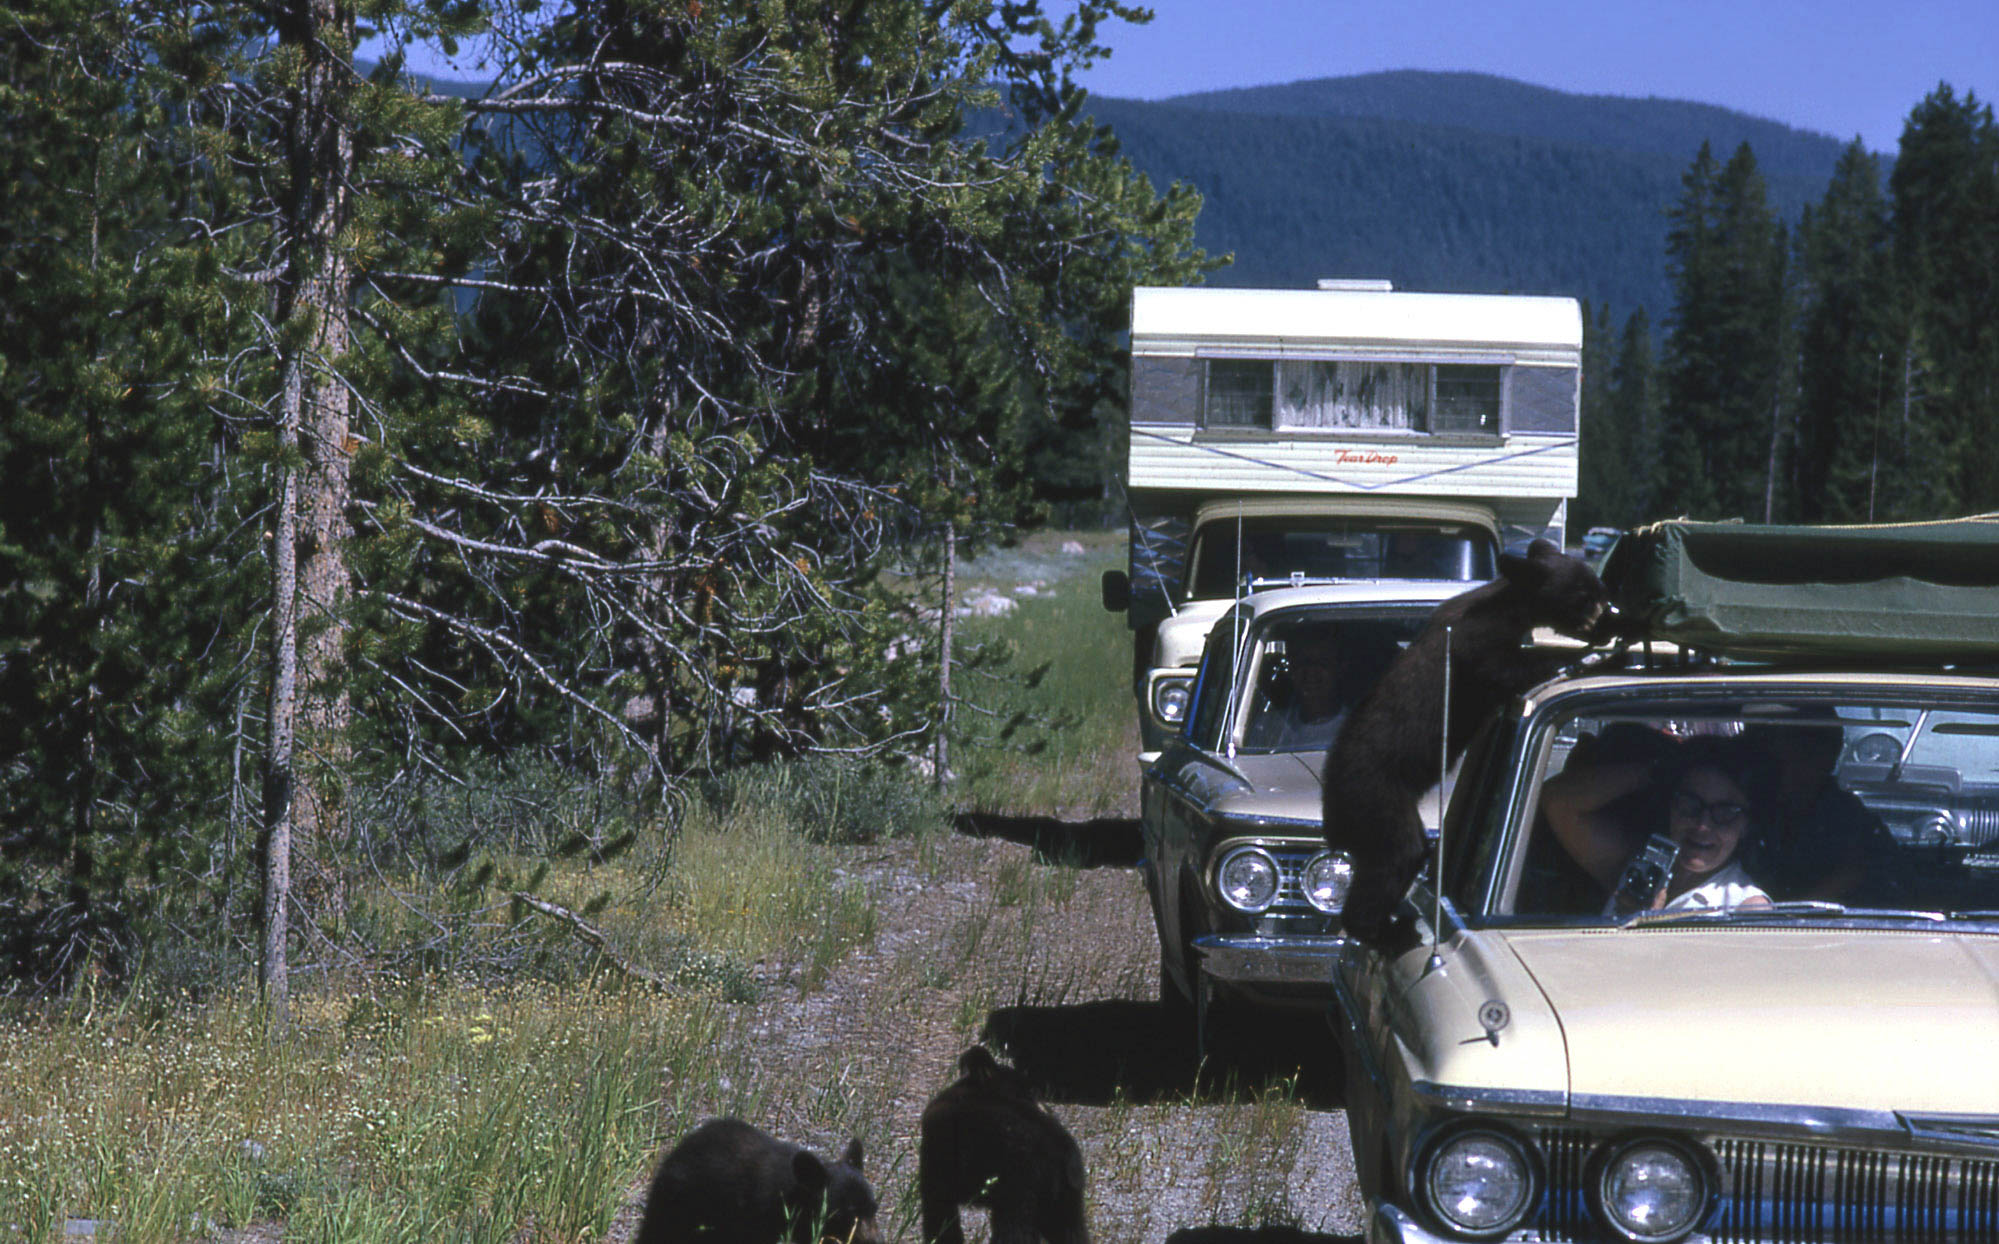 Three black bear cubs by cars, one is climbing on a car.